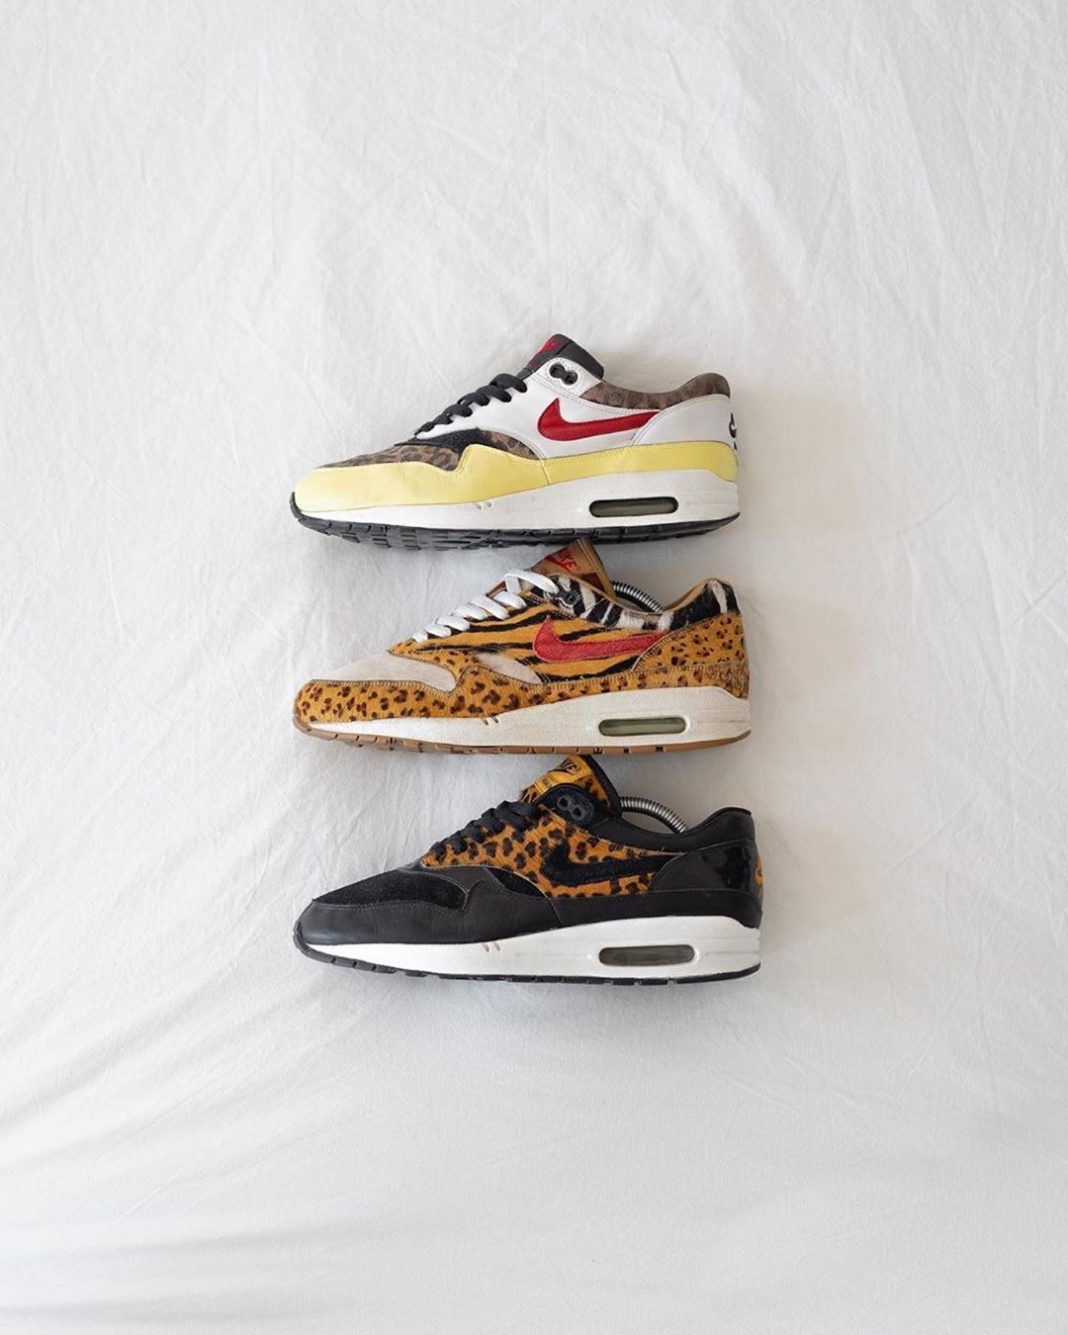 What’s your favorite AM1?...